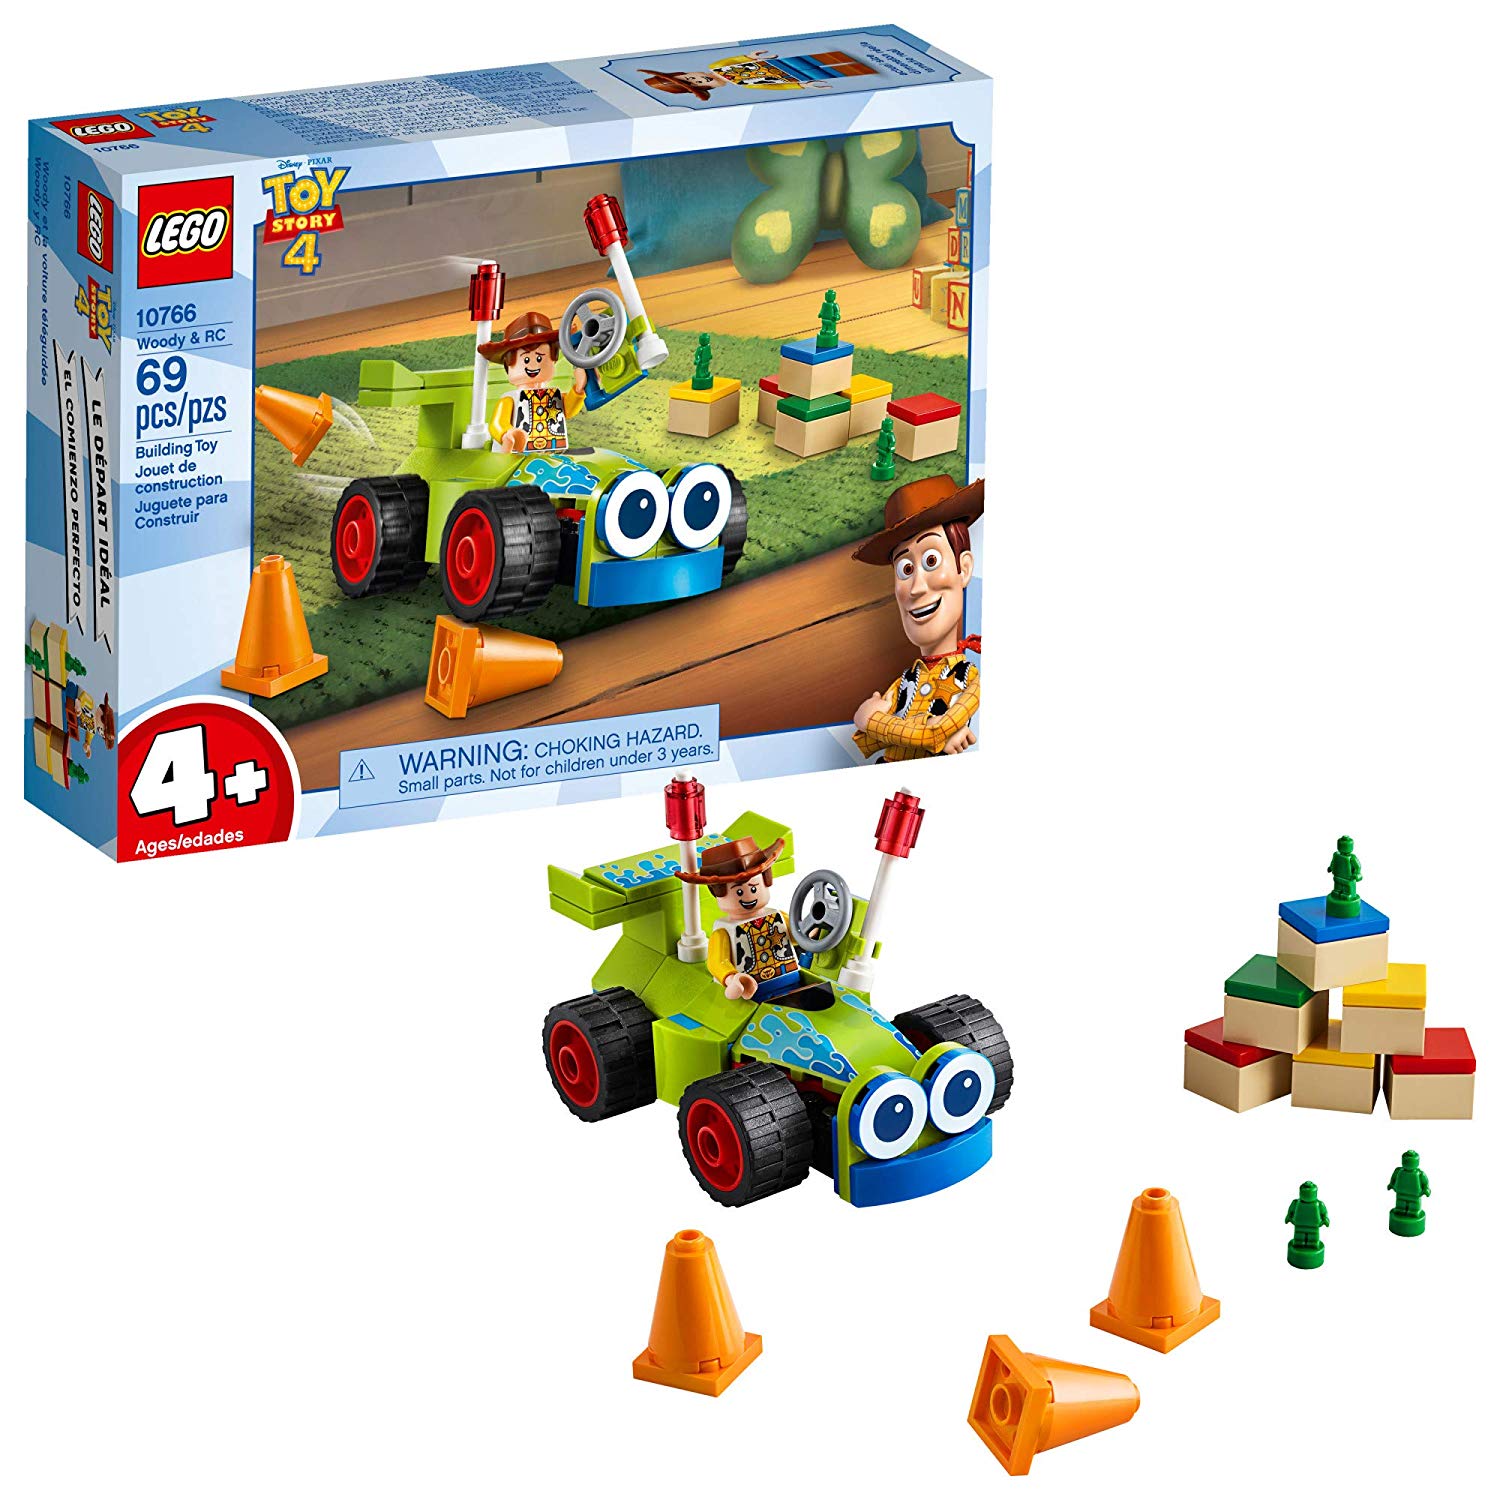 LEGO Disney Pixar’s Toy Story 4 Woody & RC Building Kit Only $9.99!